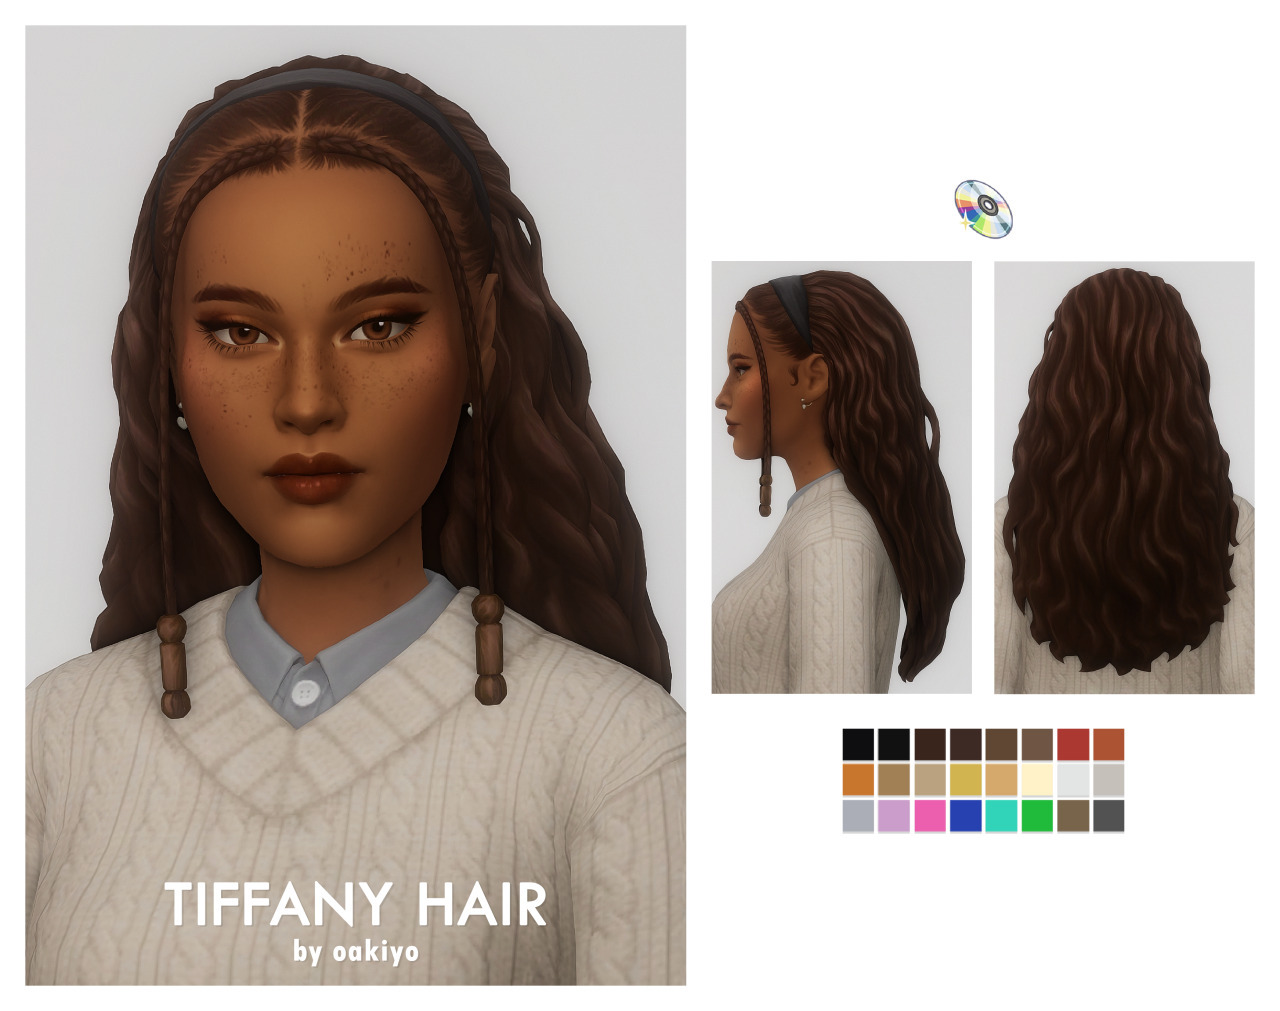 oakiyo : Tiffany Hair The new hairs from Growing Together...